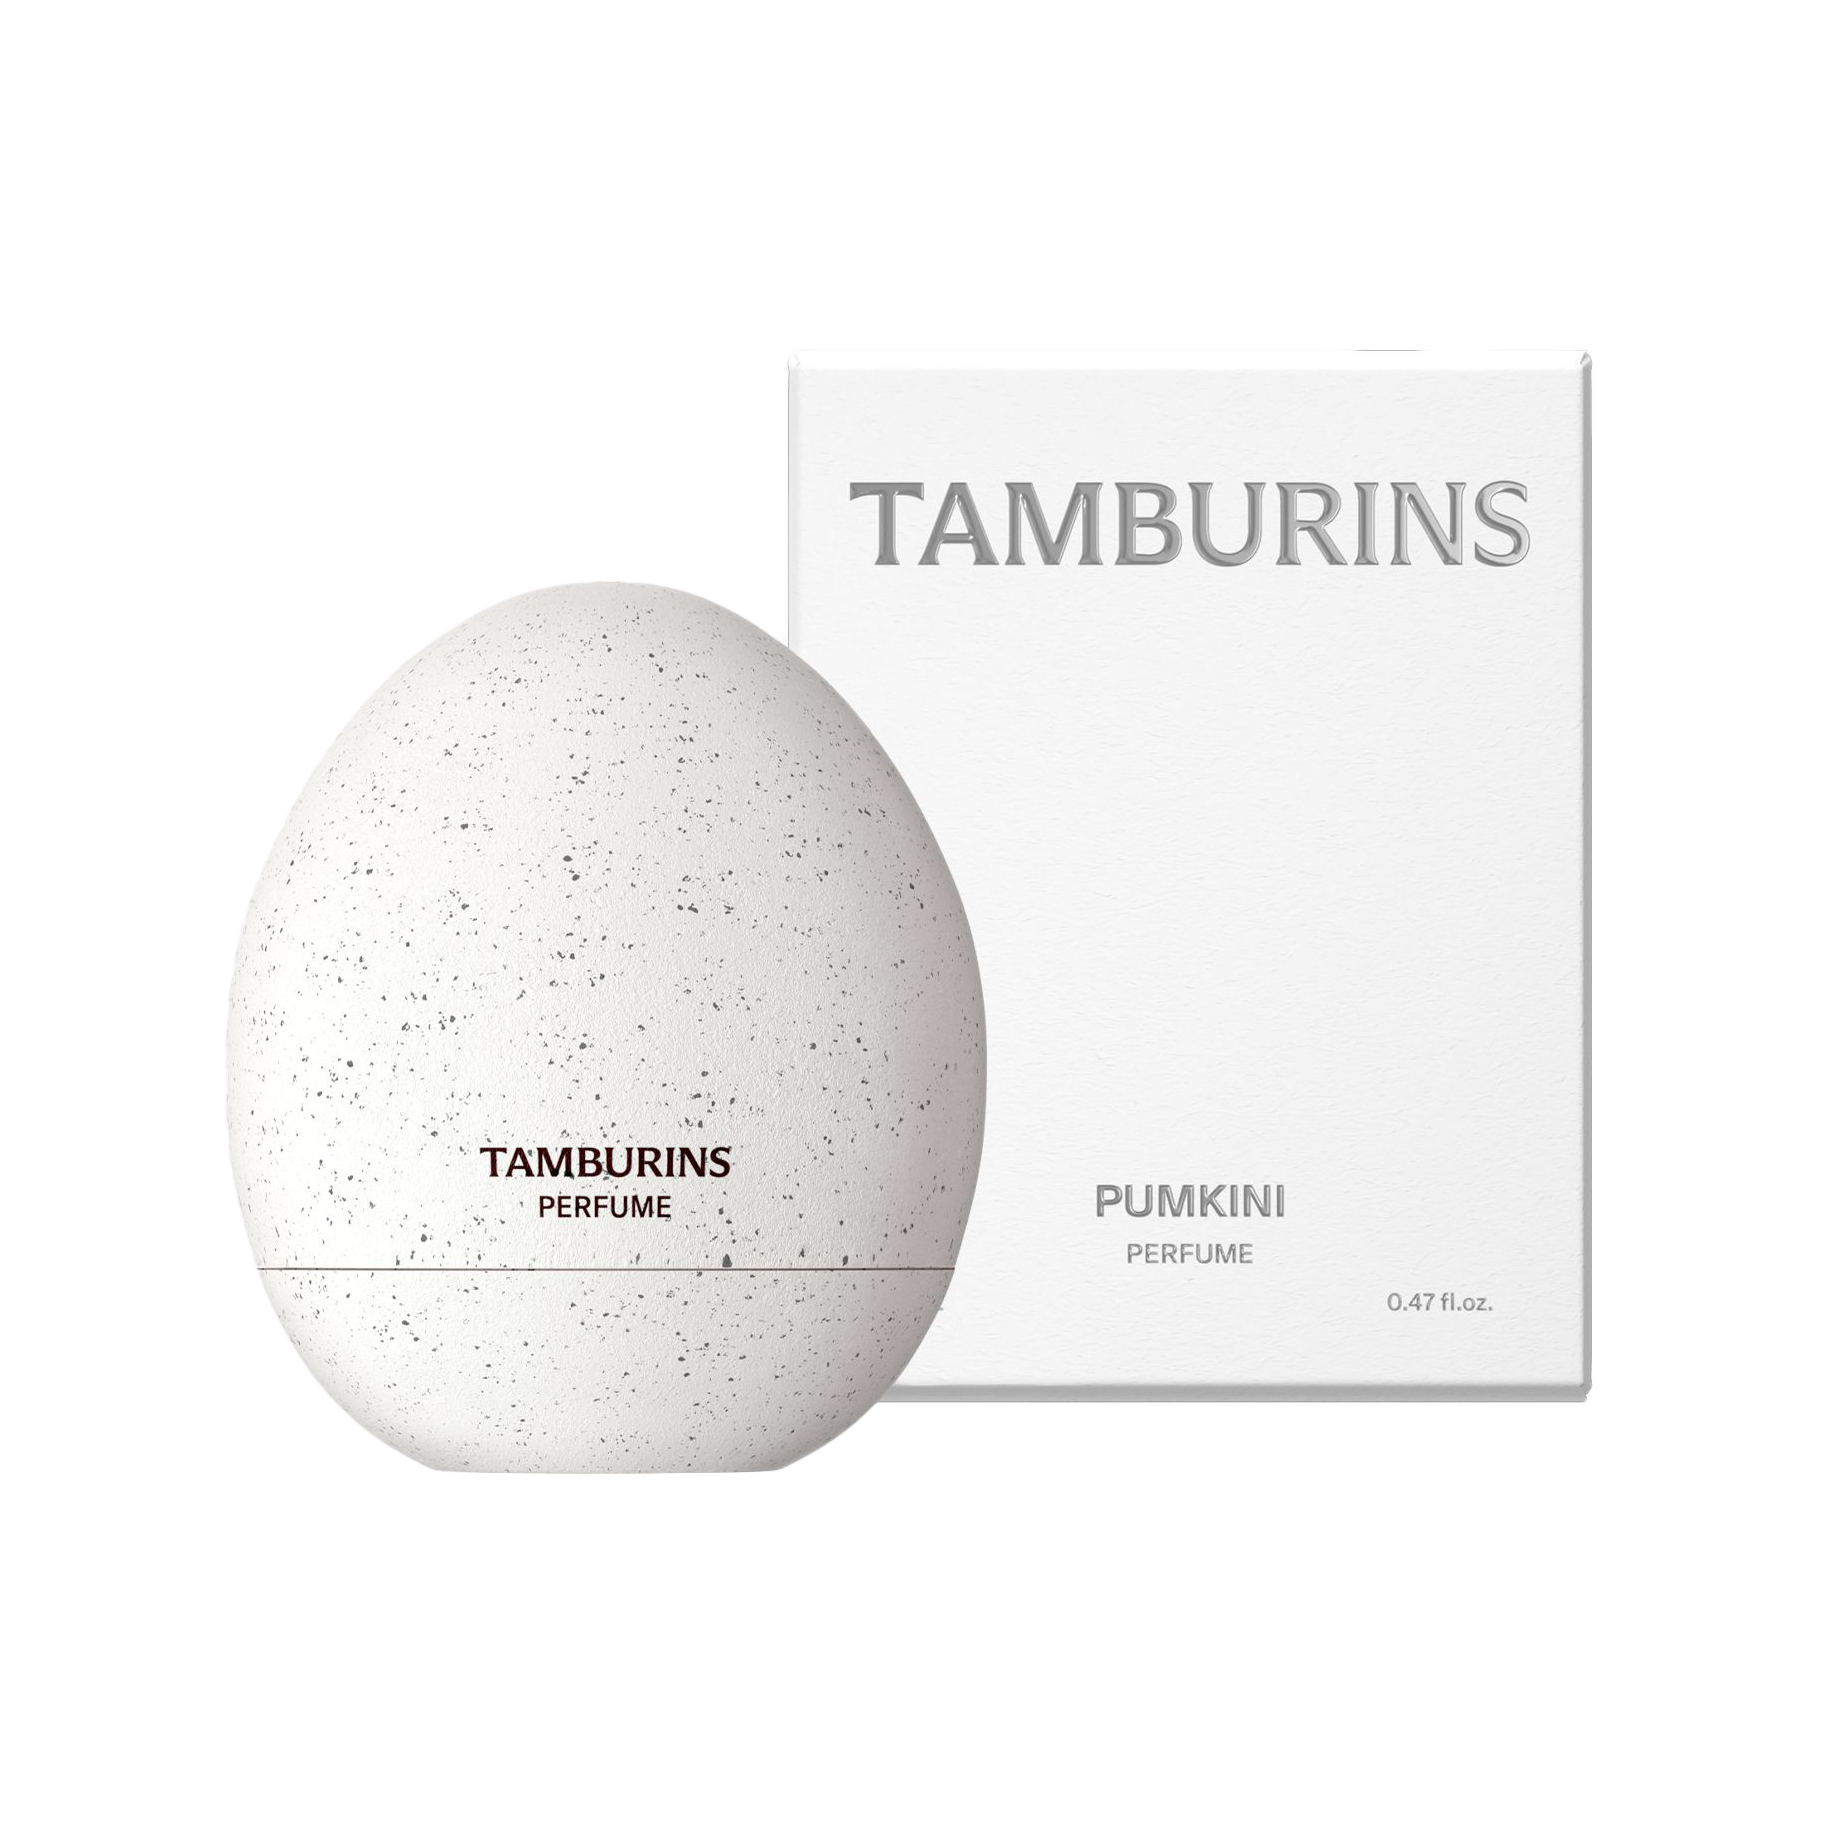 Choose from 4 types of TAMBURINS The Egg Perfume in a convenient 14ml bottle.